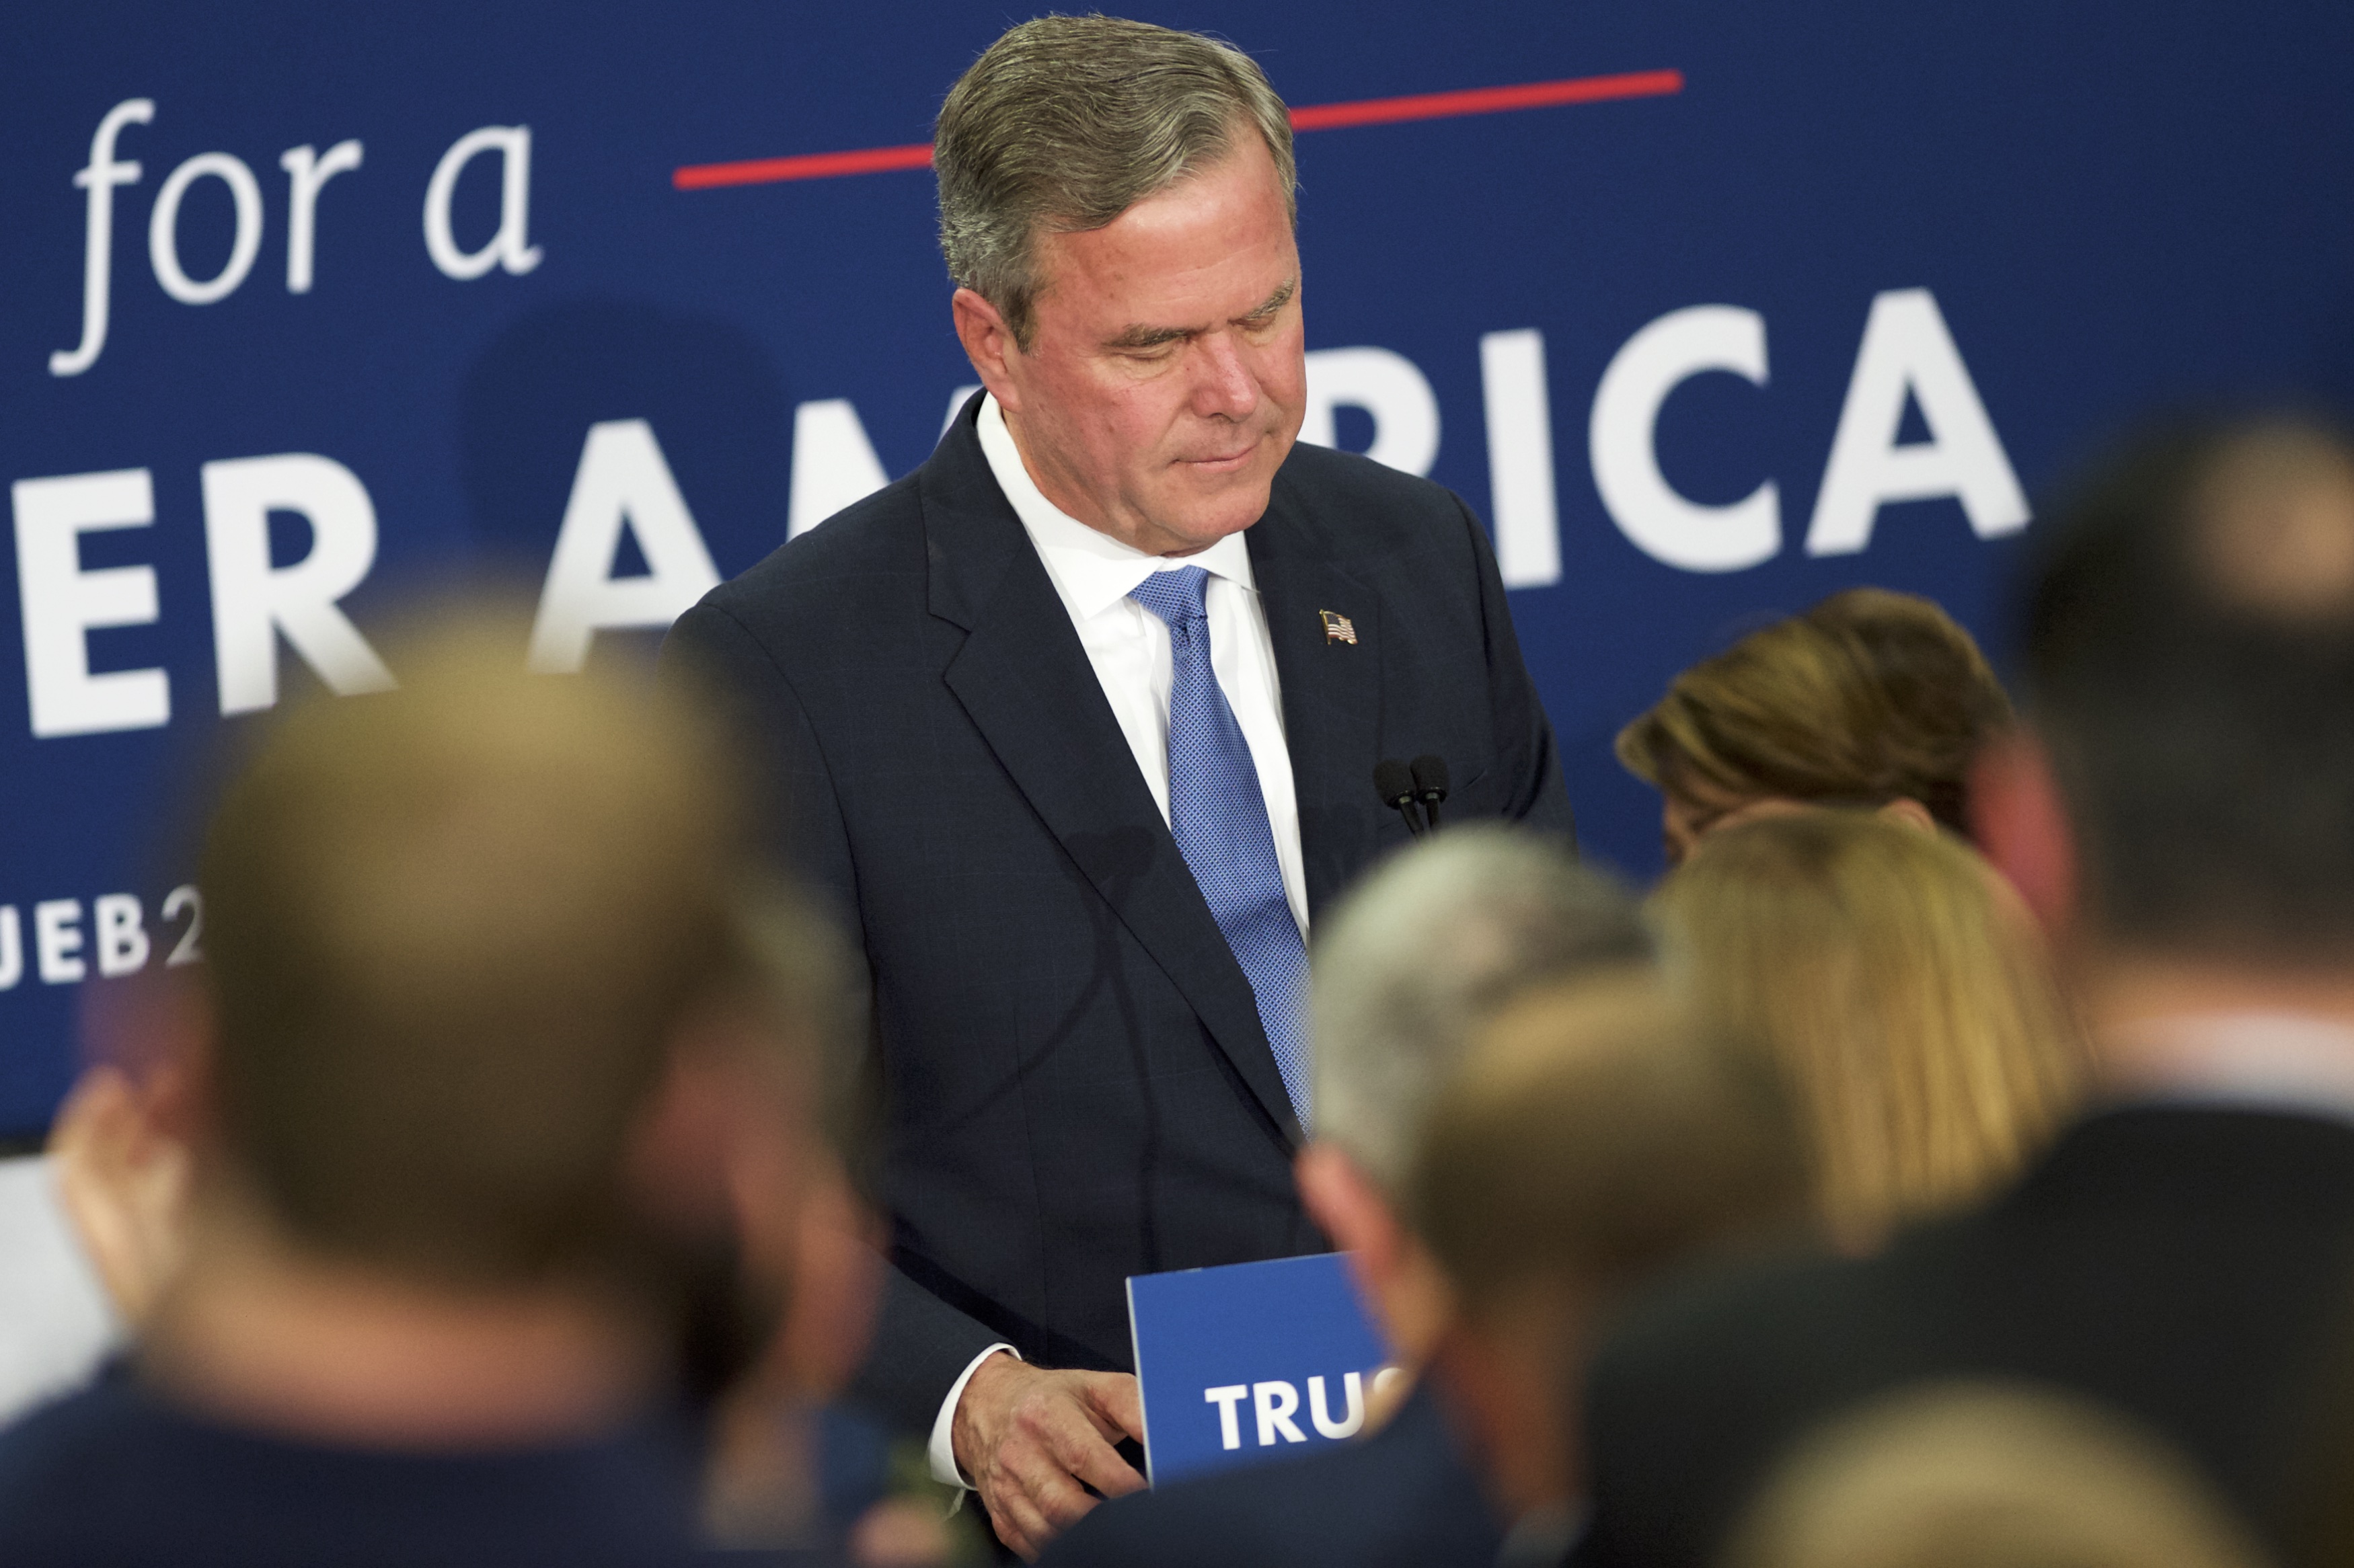 Jeb Bush reacts as he announces the suspension of his presidential campaign in Columbia, SC on Feb. 20, 2016. (Mark Makela—Getty Images)